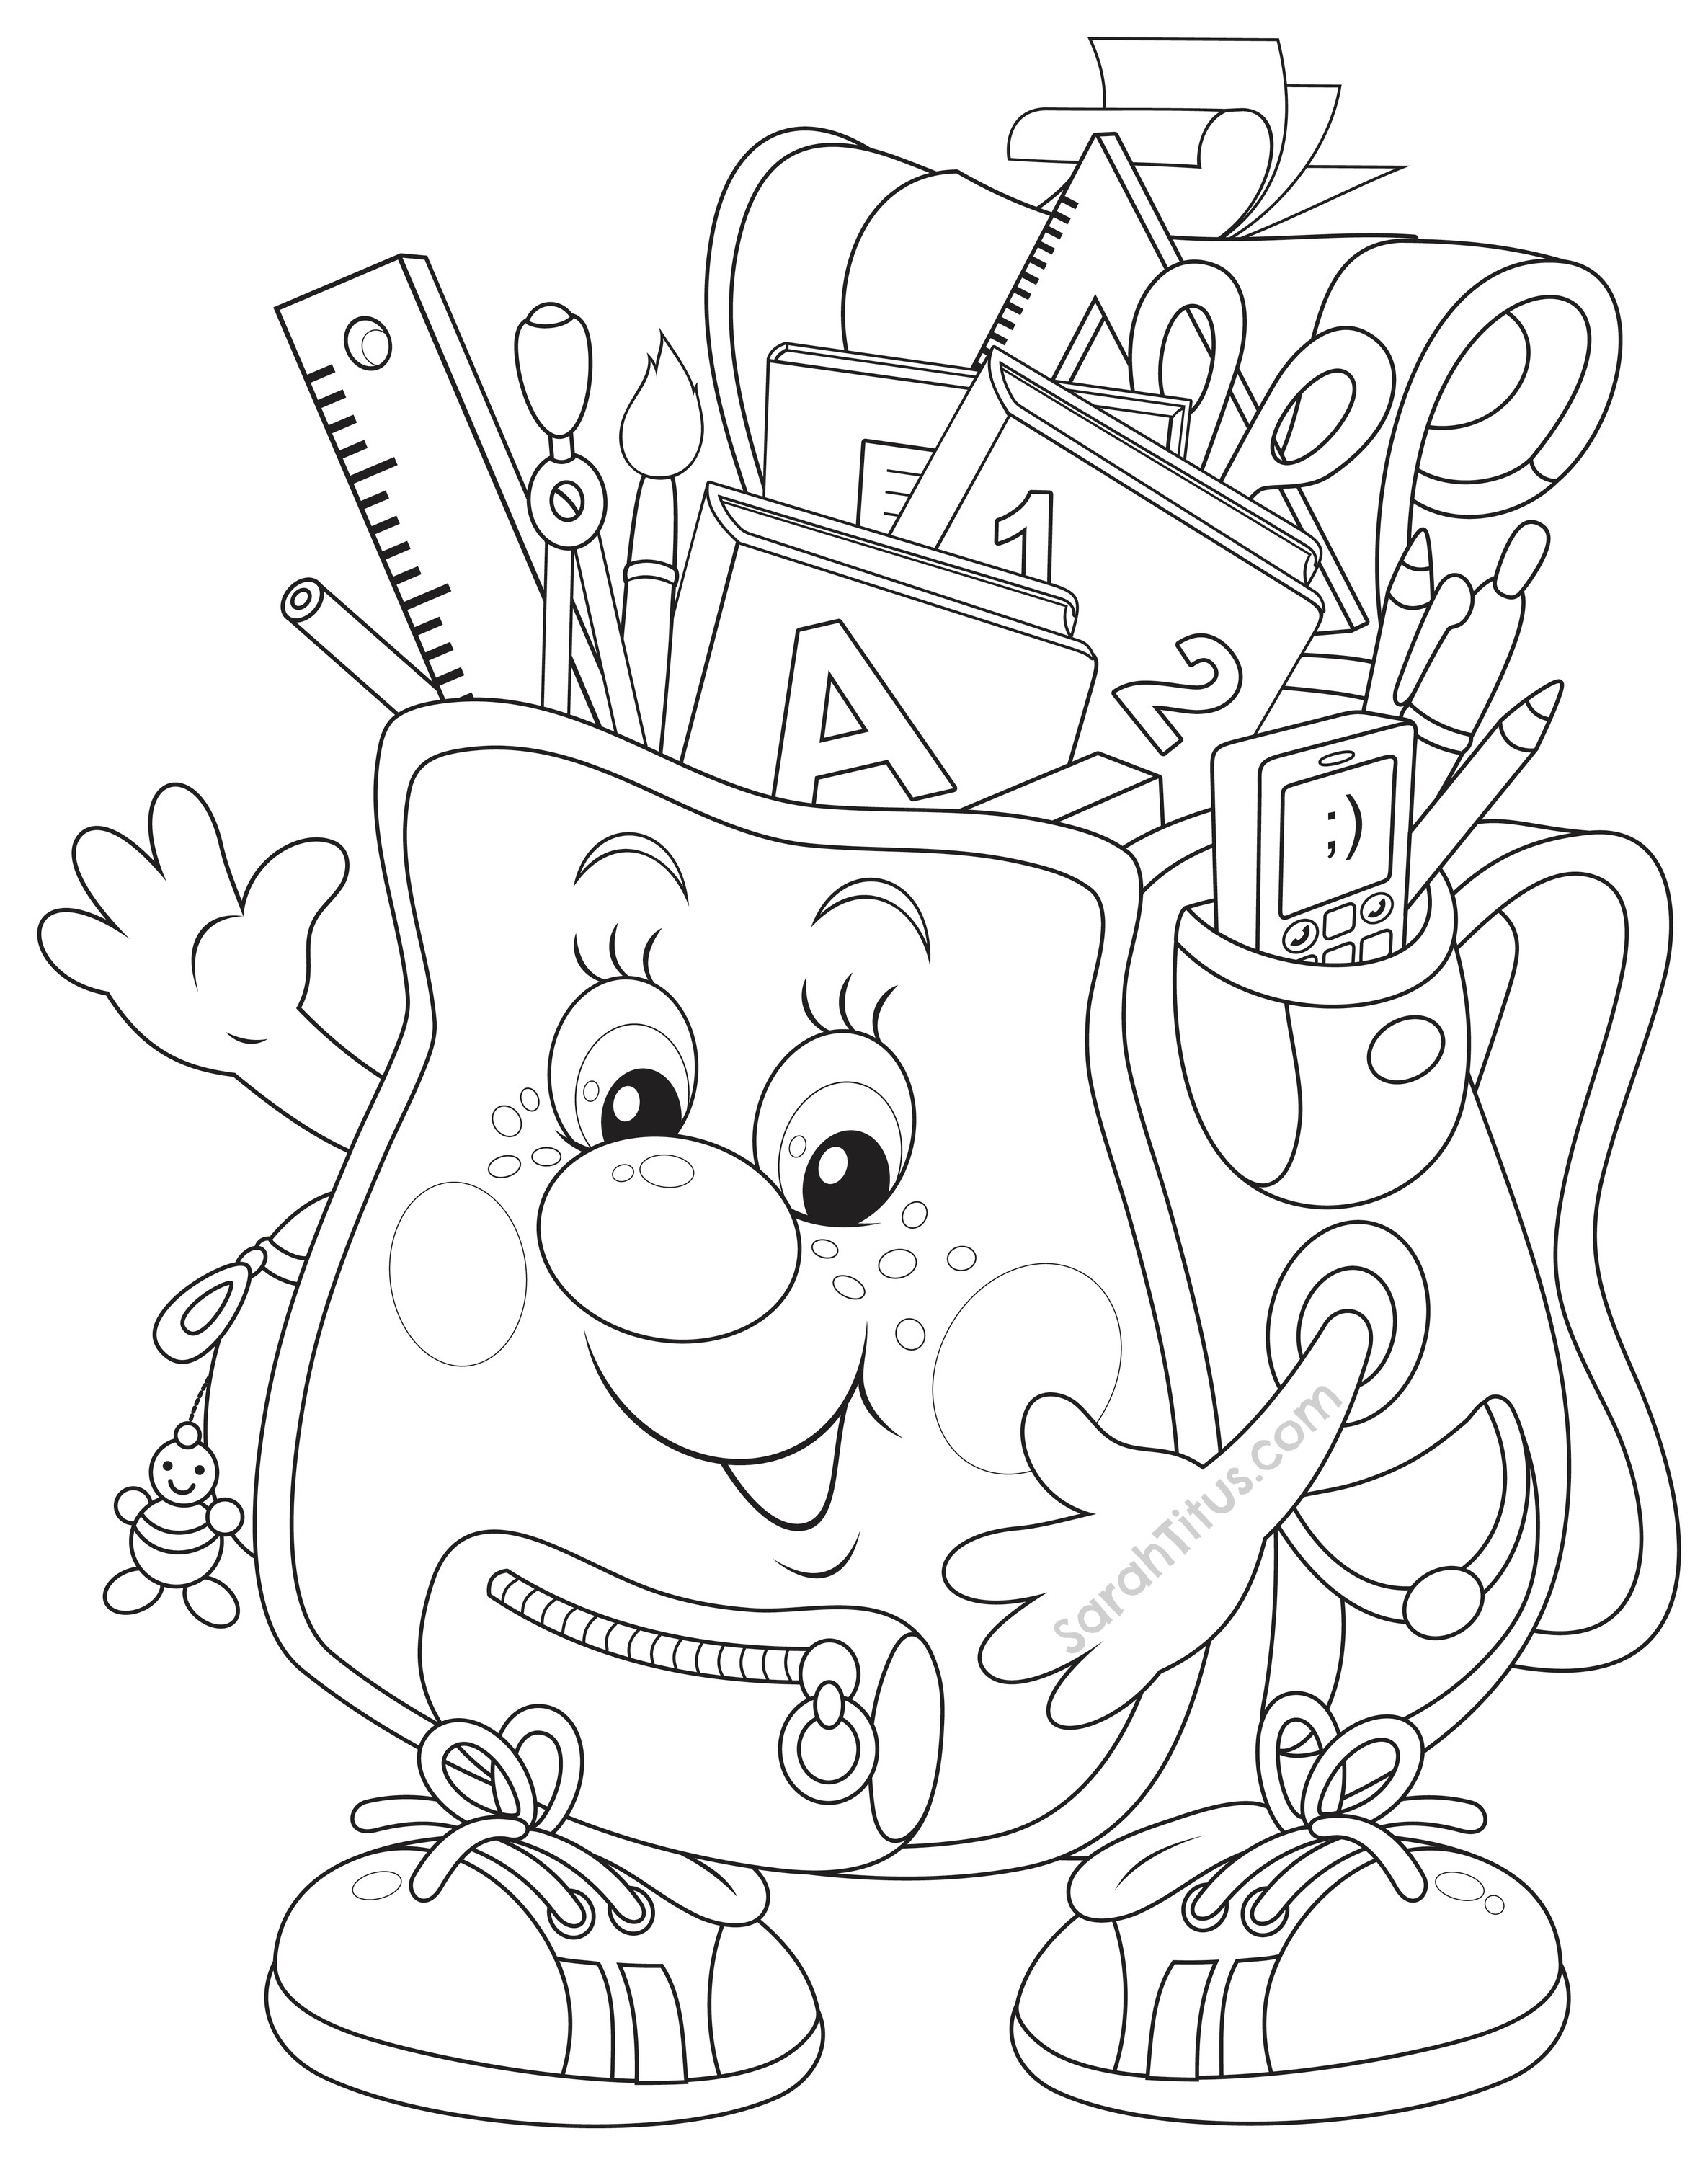 Coloring Sheets For Boys Age 5
 Back to School Coloring Pages Sarah Titus